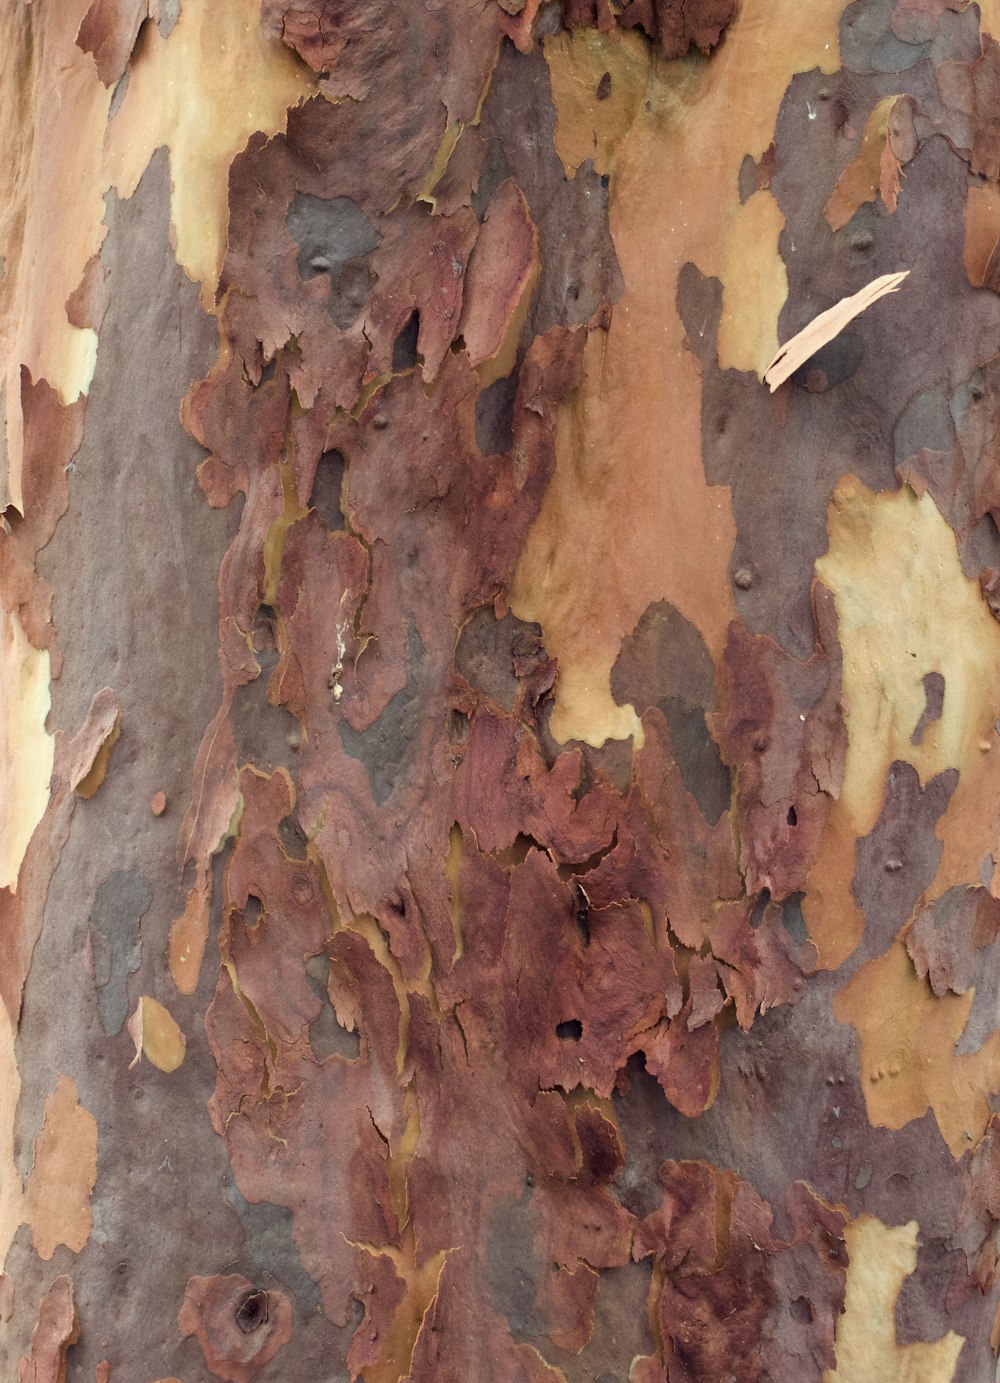 a close up of a tree trunk with brown and yellow leaves